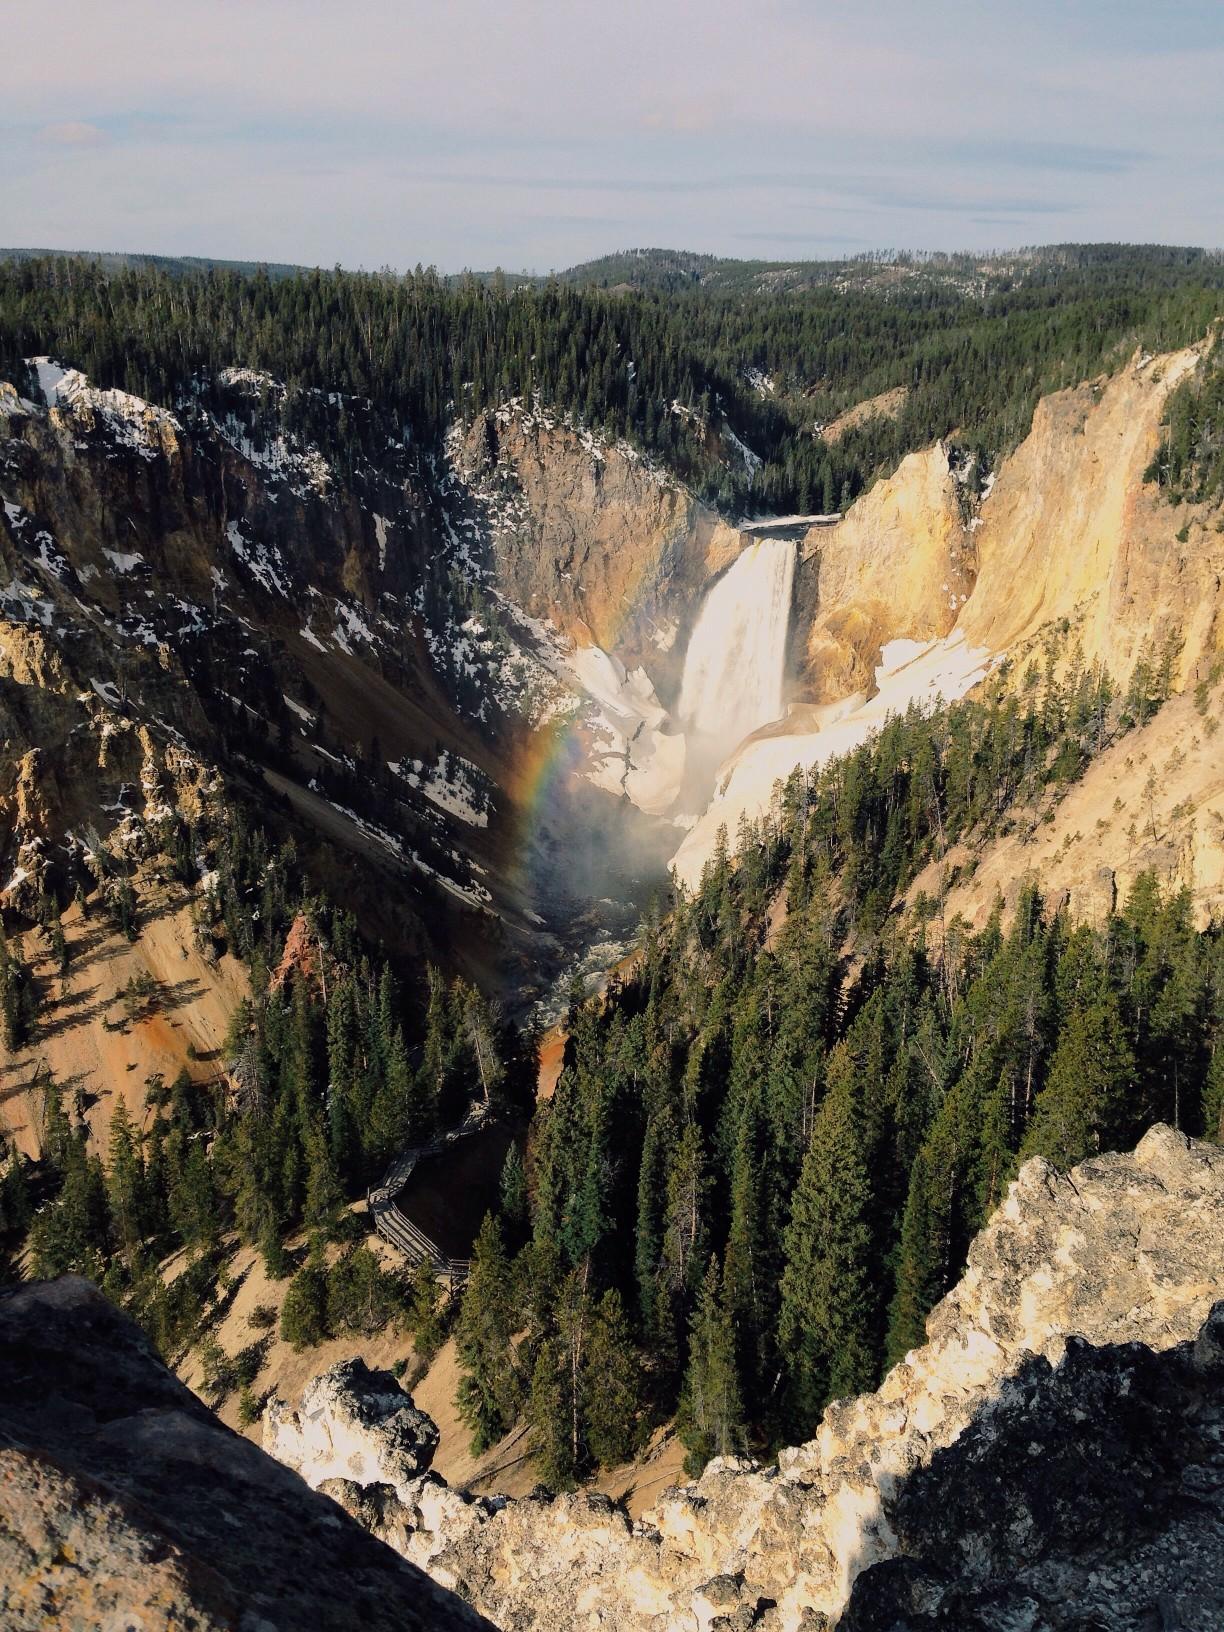 The Lower Falls of the Yellowstone River at Yellowstone State Park.